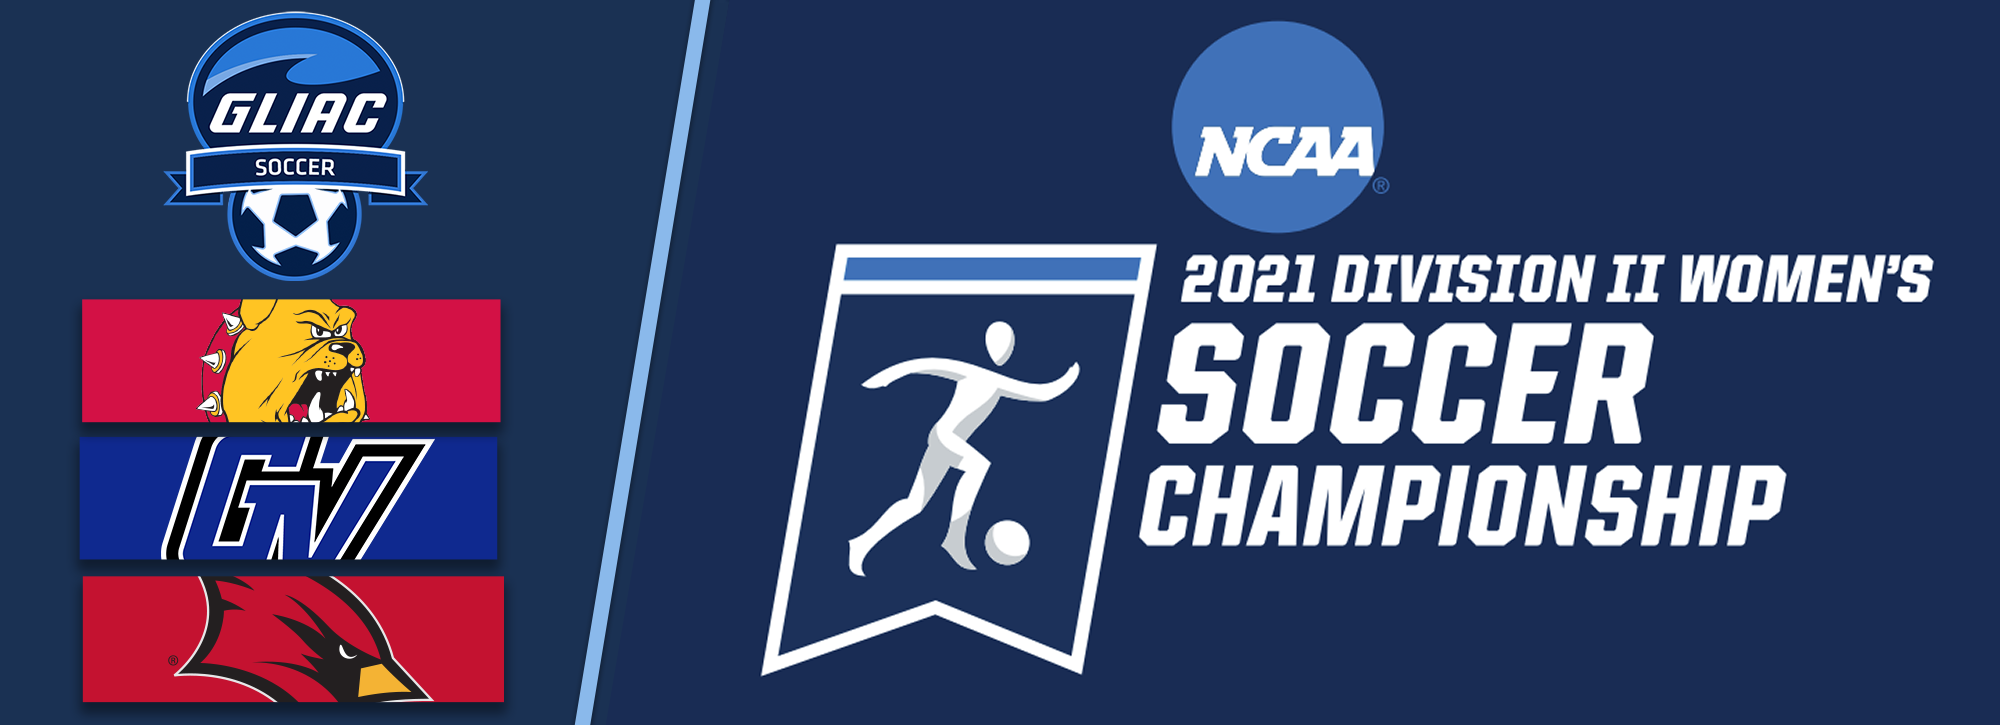 Grand Valley State, Ferris State and Saginaw Valley State headed to NCAA Division II Women's Soccer postseason